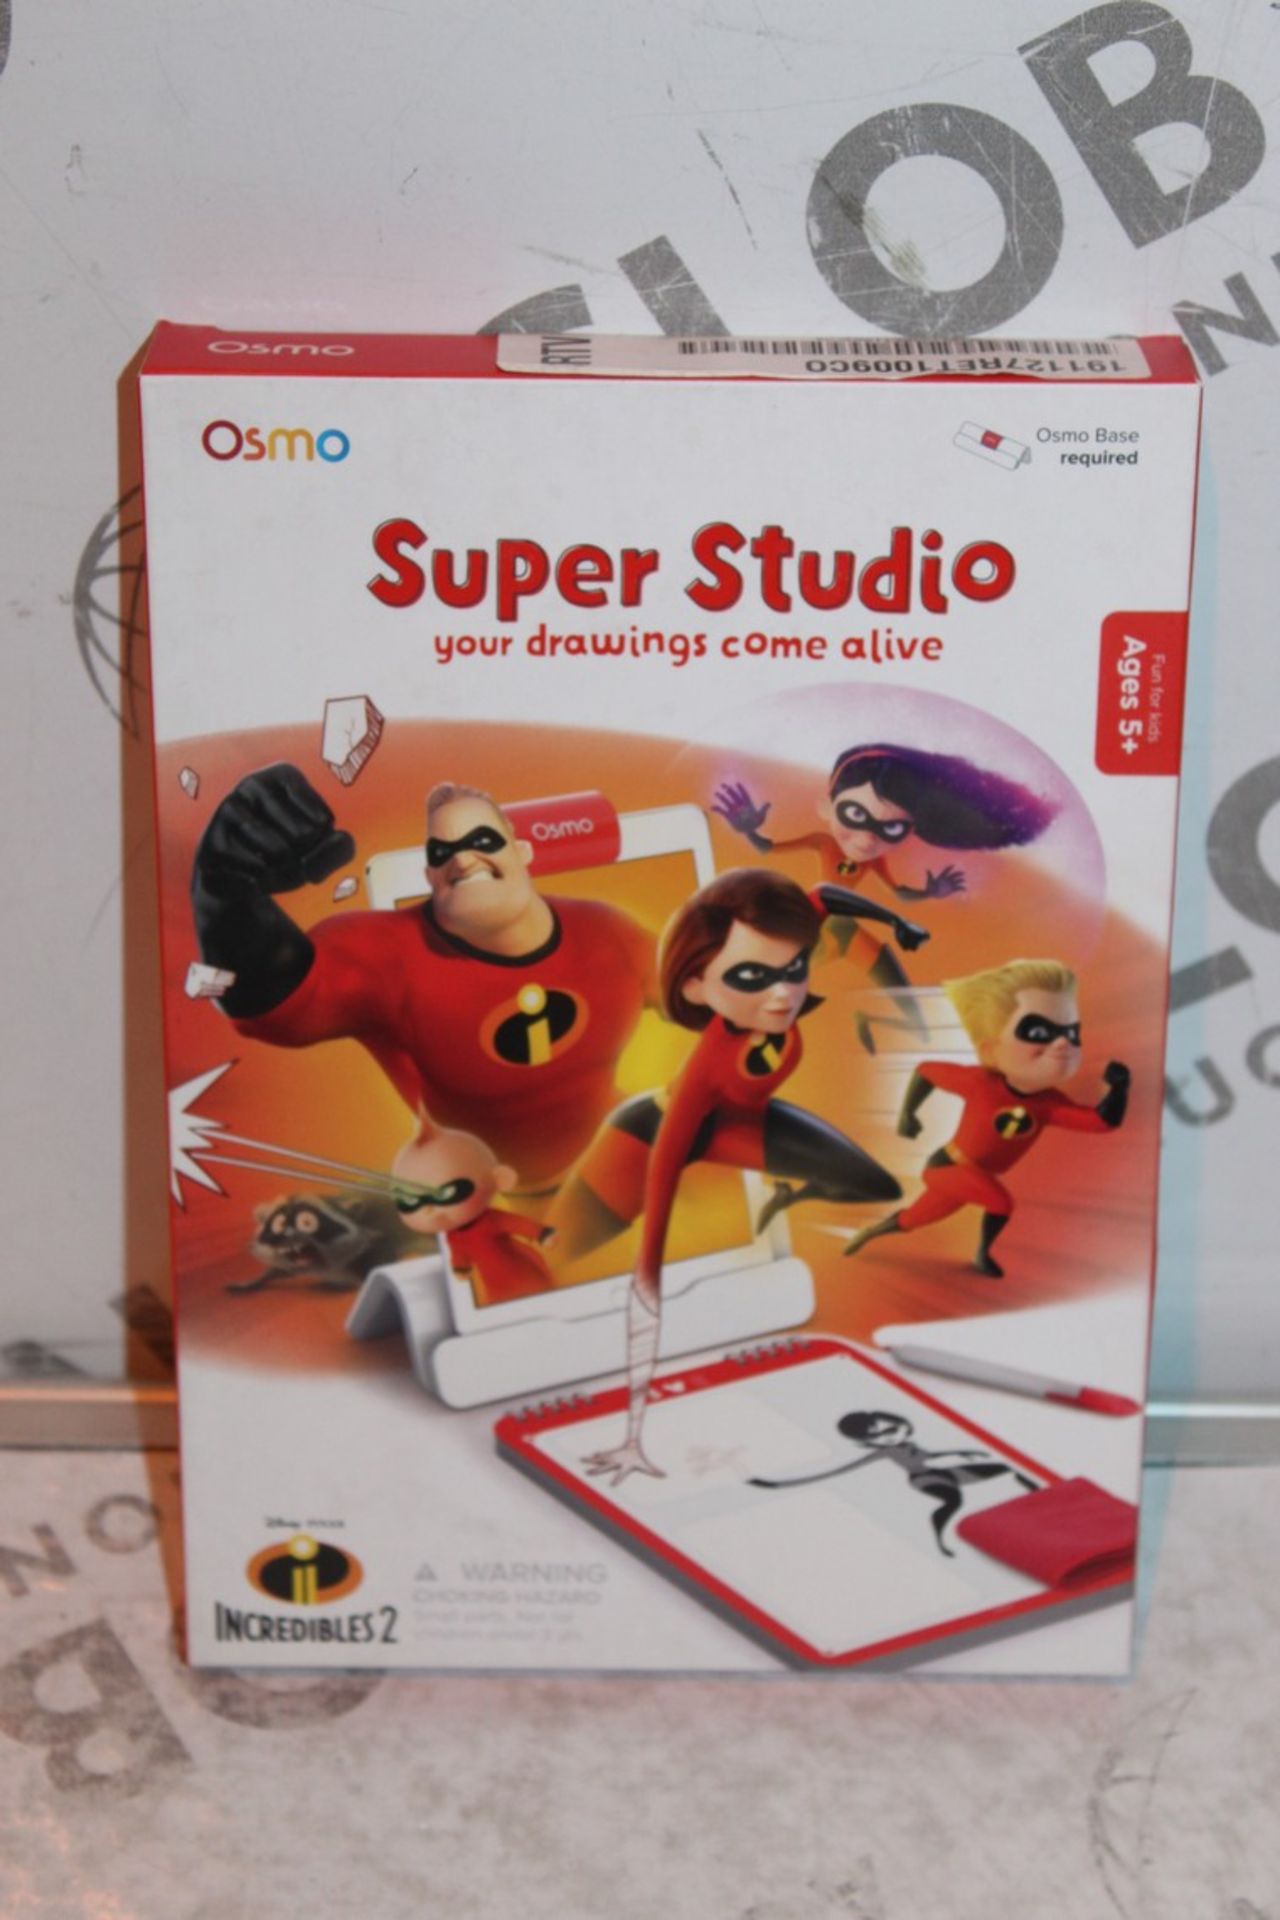 5 Boxed Brand-New Osmo Super Studio Drawings Come To Life Games, RRP£150.00 (Public Viewings And